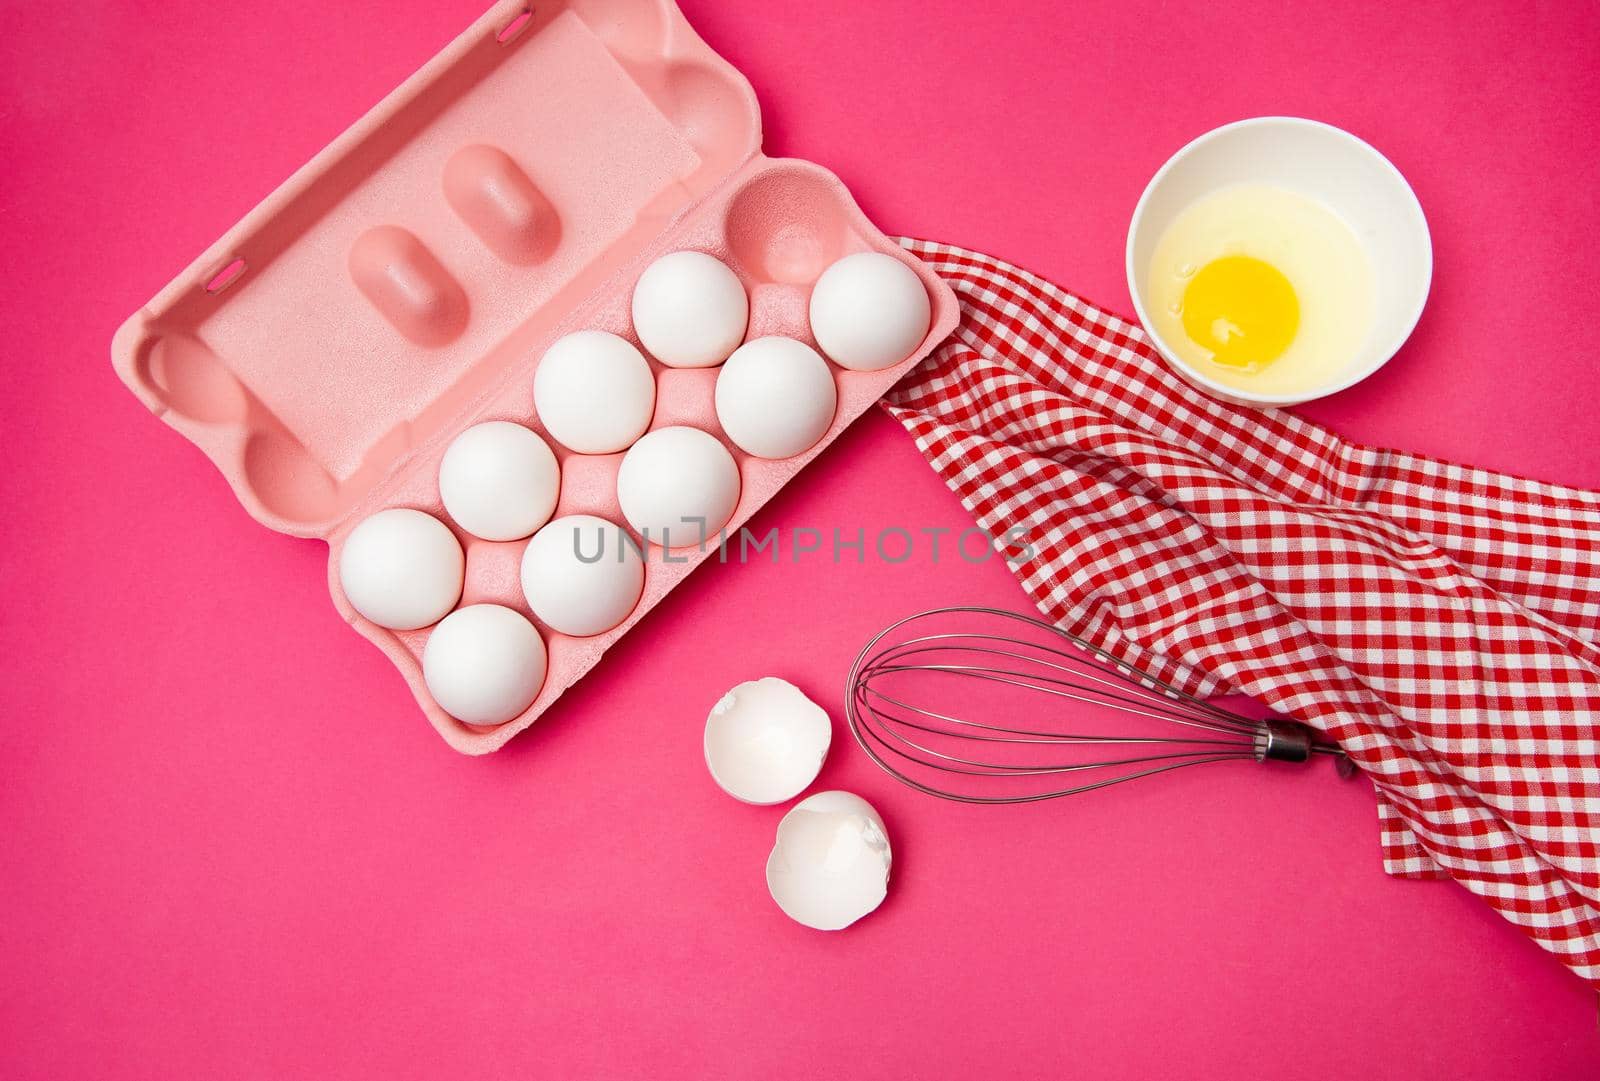 Box of eggs near bowl of yolk and whisk on pink table by Julenochek